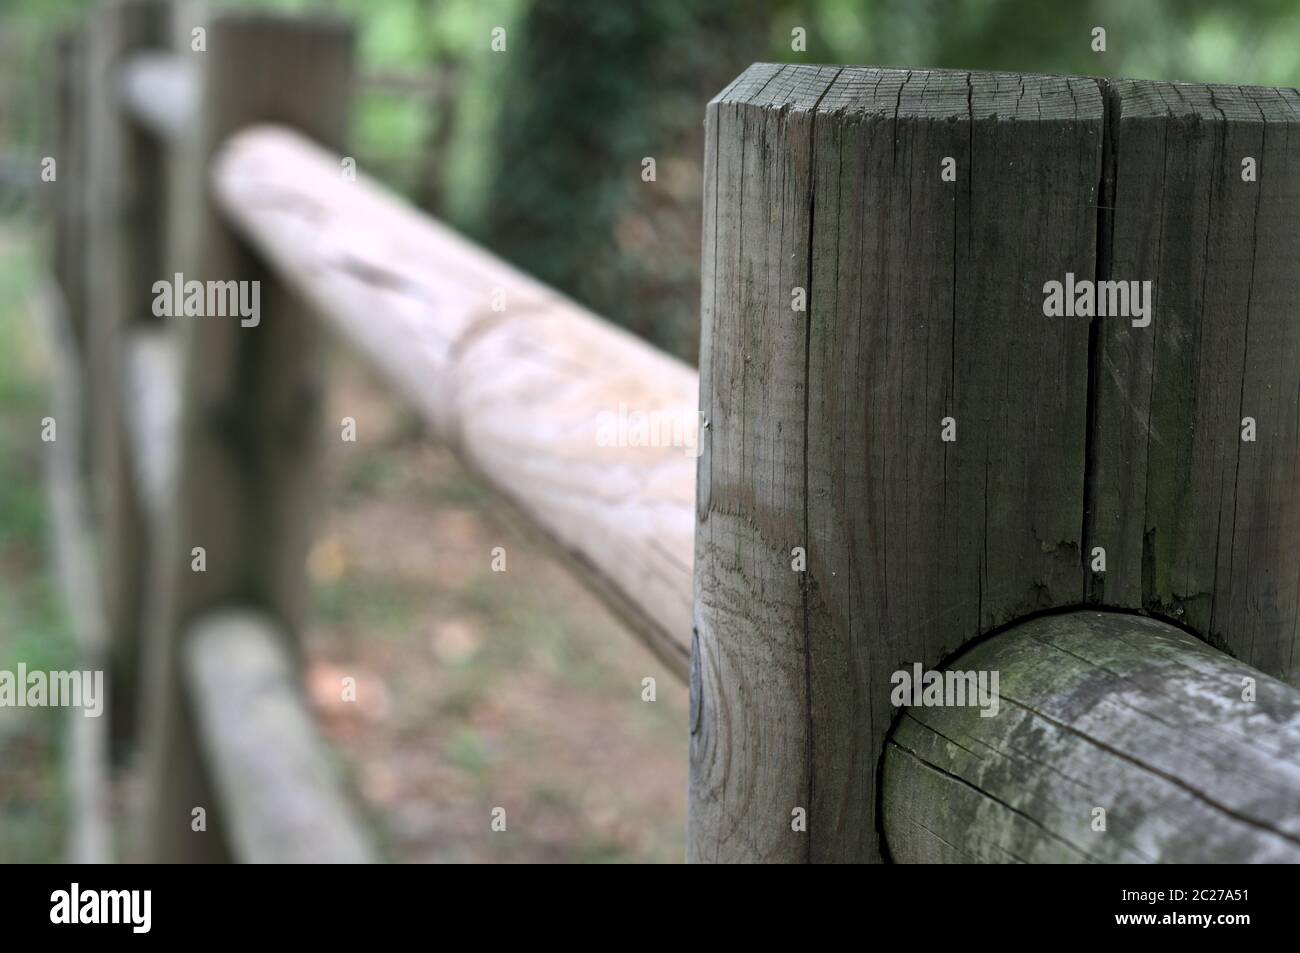 wood fence in the foreground Stock Photo